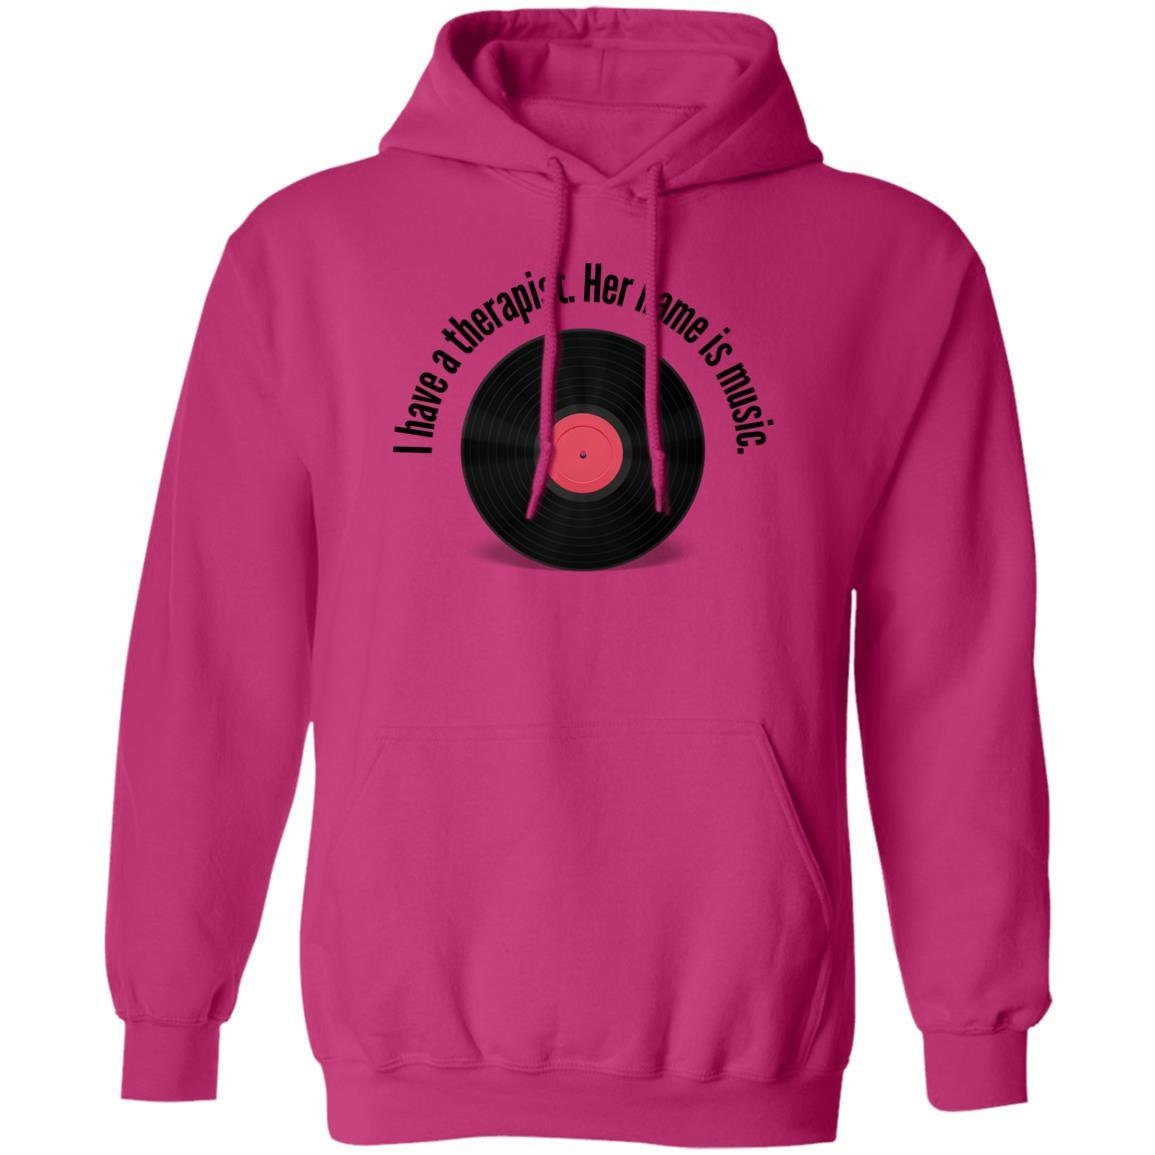 I have a therapist. Her name is music. Hoodie